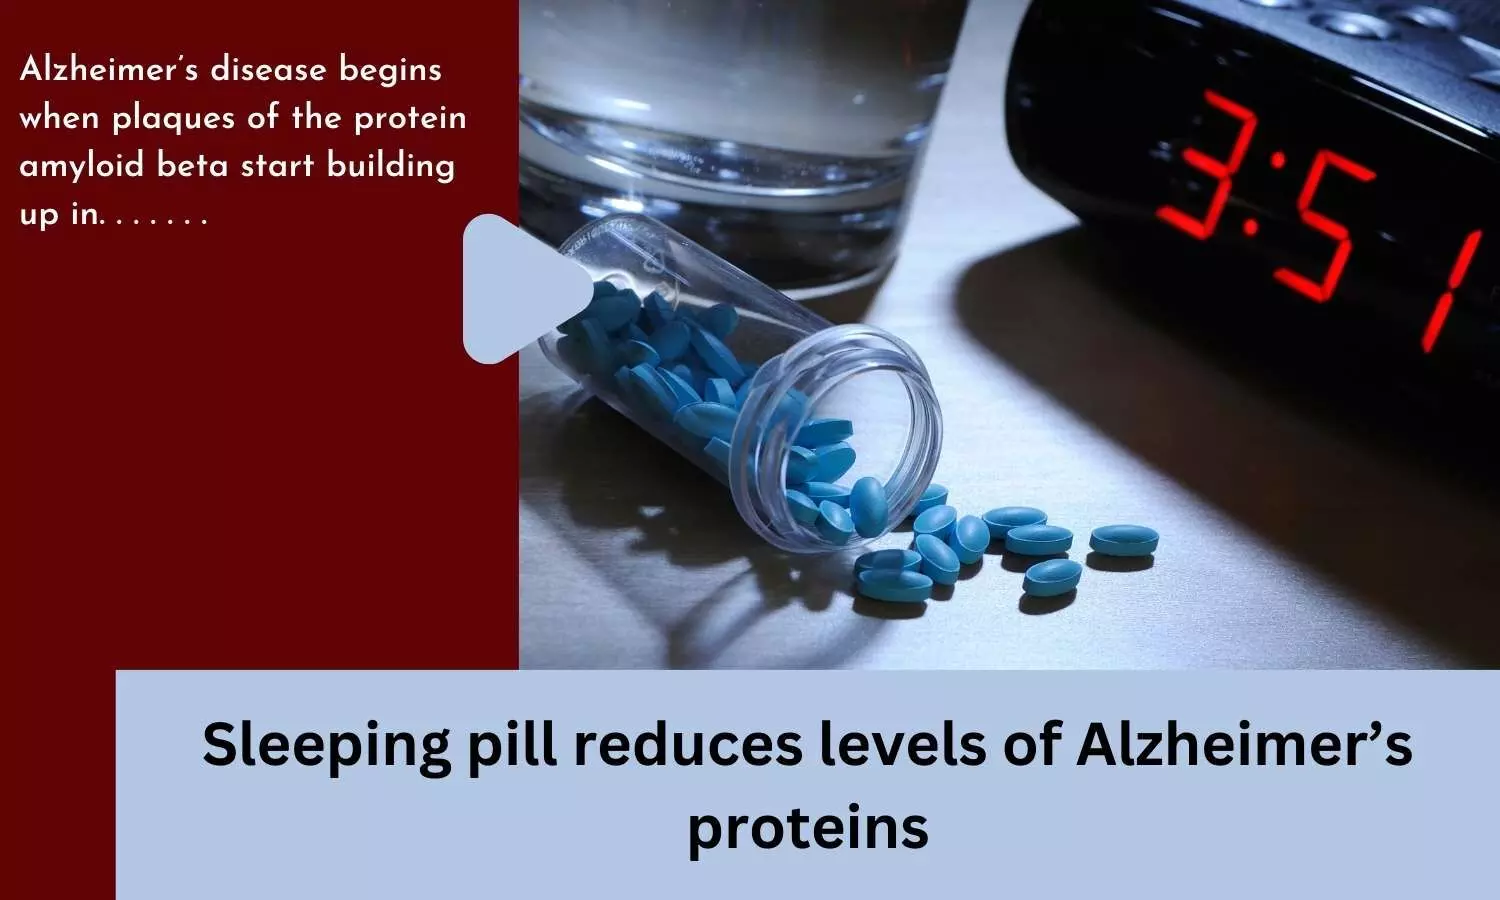 Sleeping pill reduces levels of Alzheimers proteins